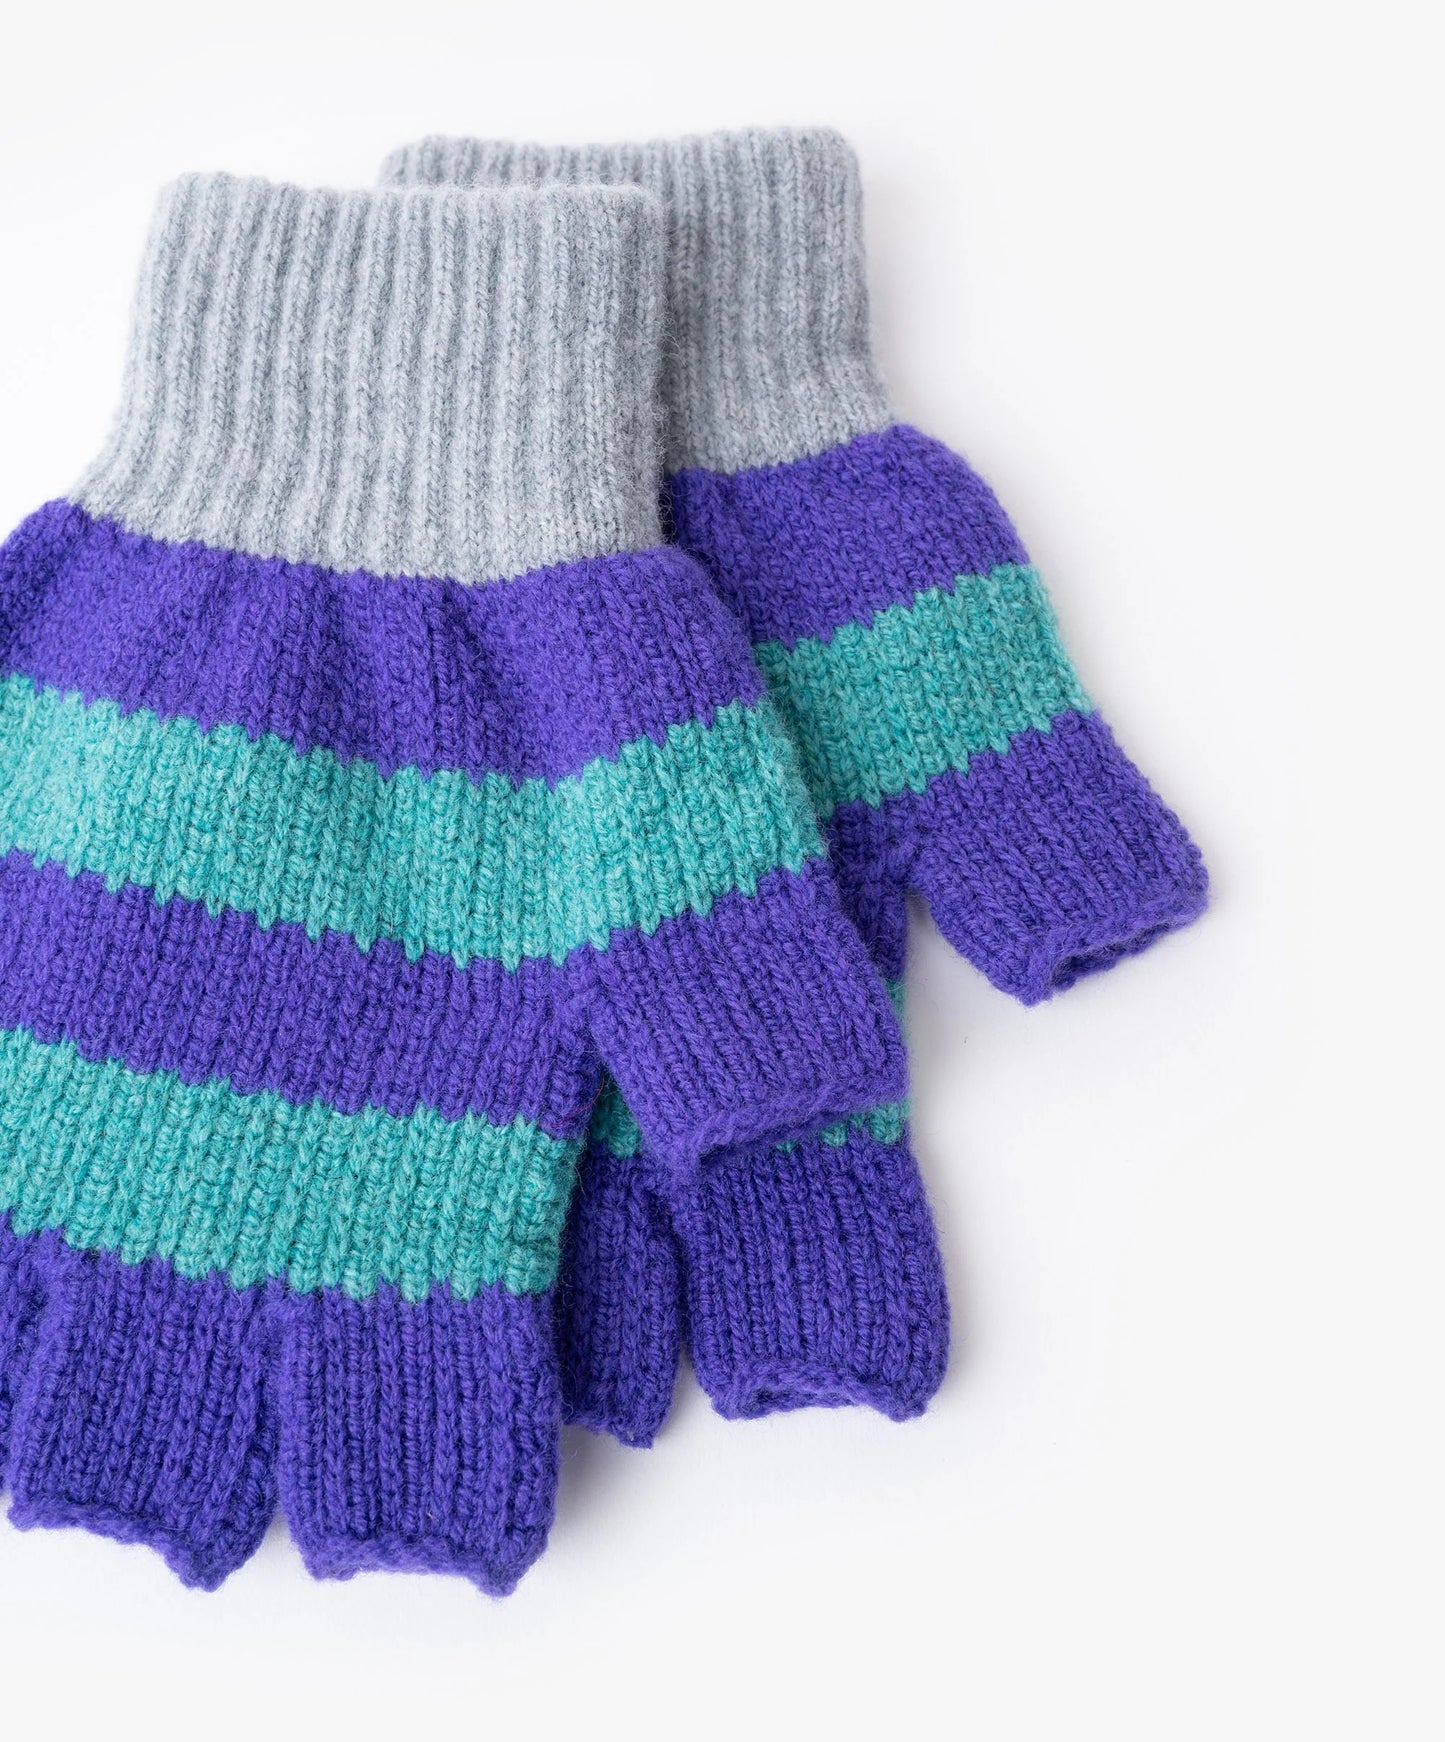 Howlin' Striped No Fingers Gloves - Mint